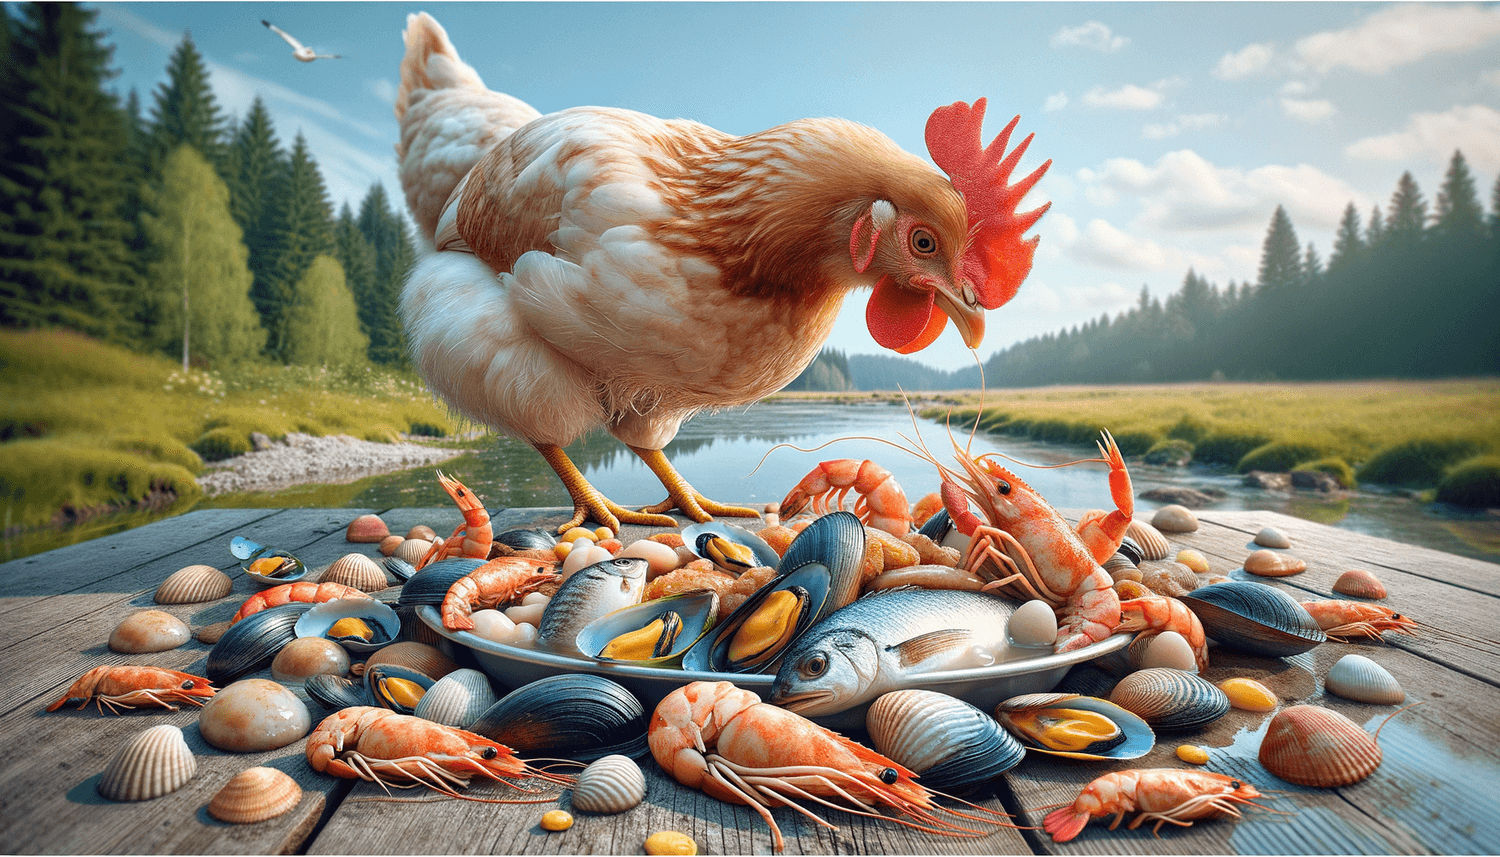 Can Chickens Eat Seafood?